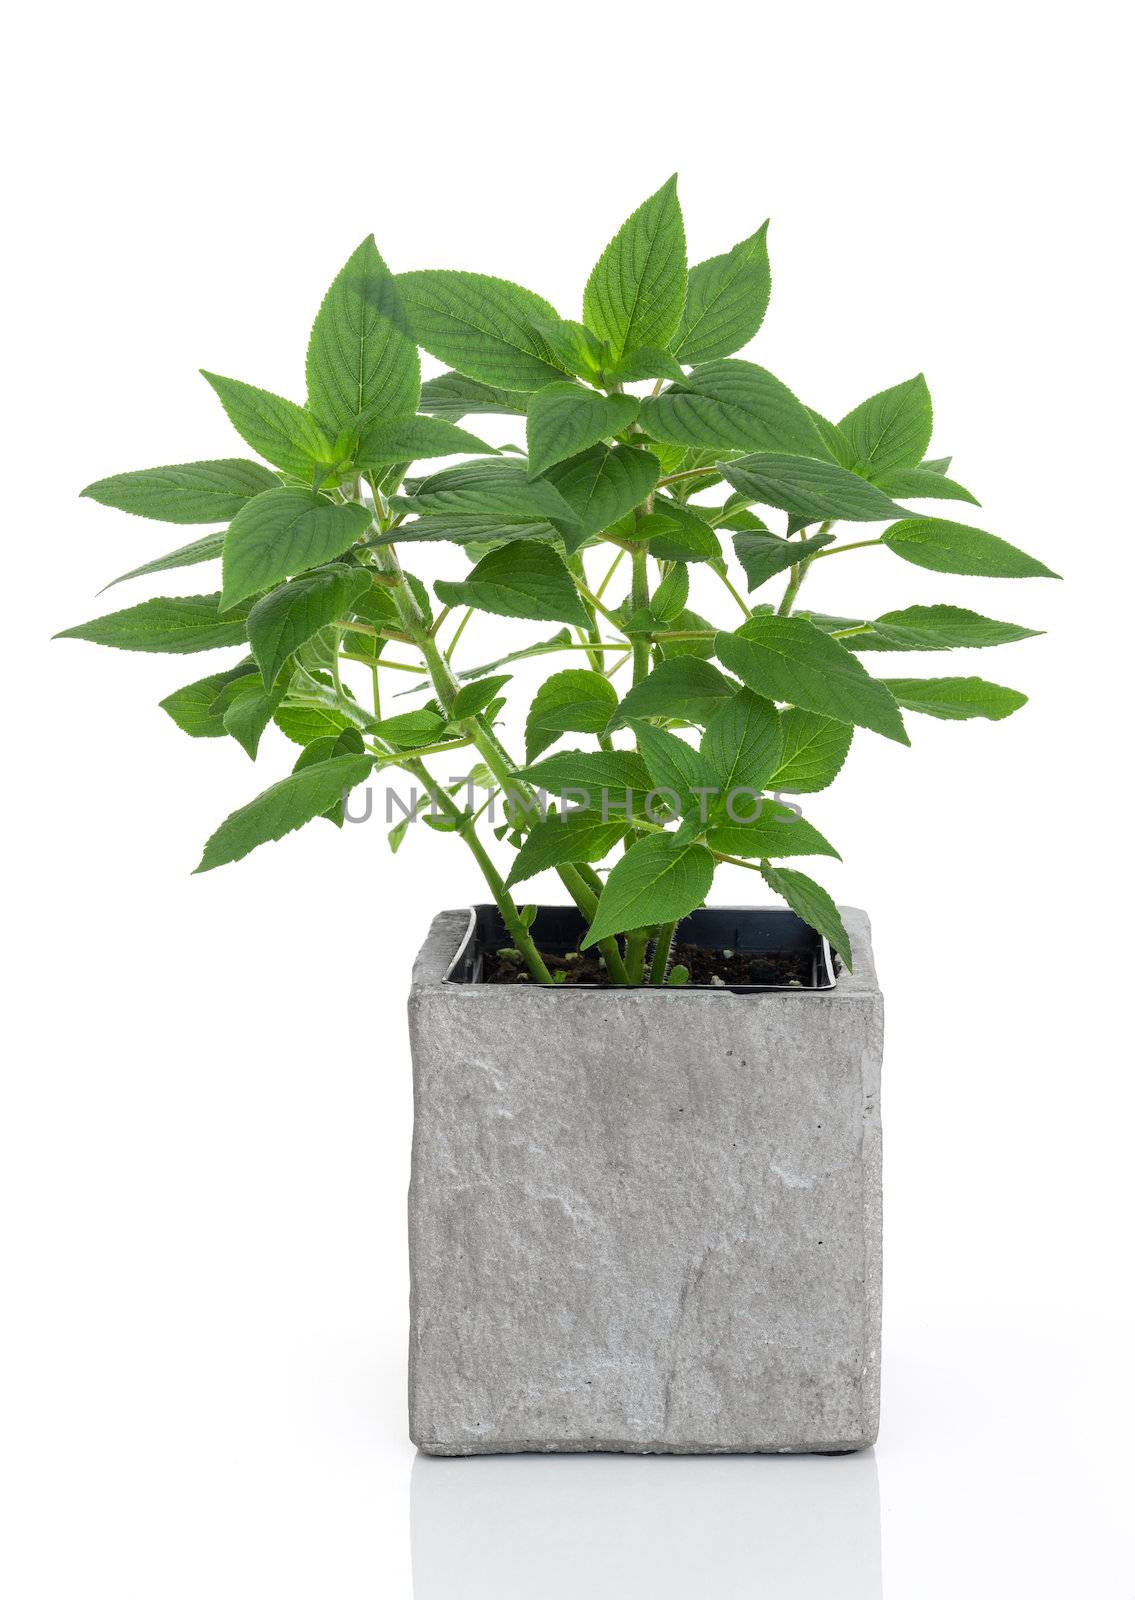 Fresh green mint in a concrete pot, isolated on white background.